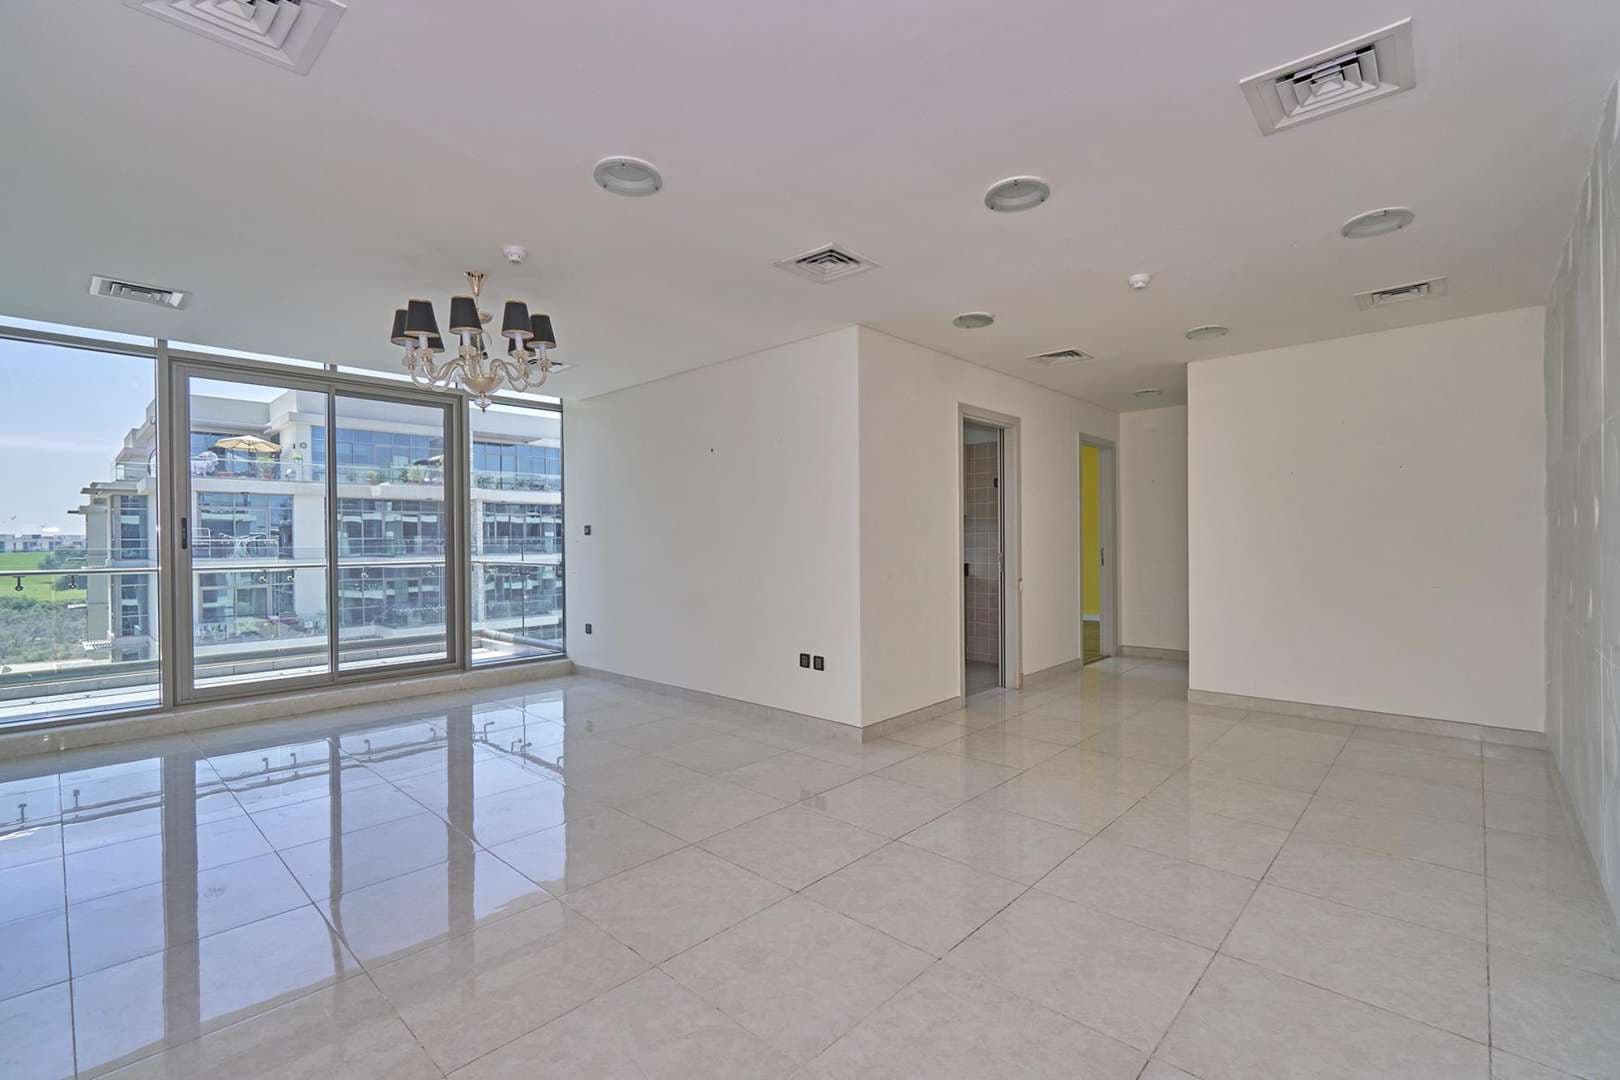 2 Bedroom Apartment For Rent The Polo Residence Lp06380 89ace29be913900.jpg